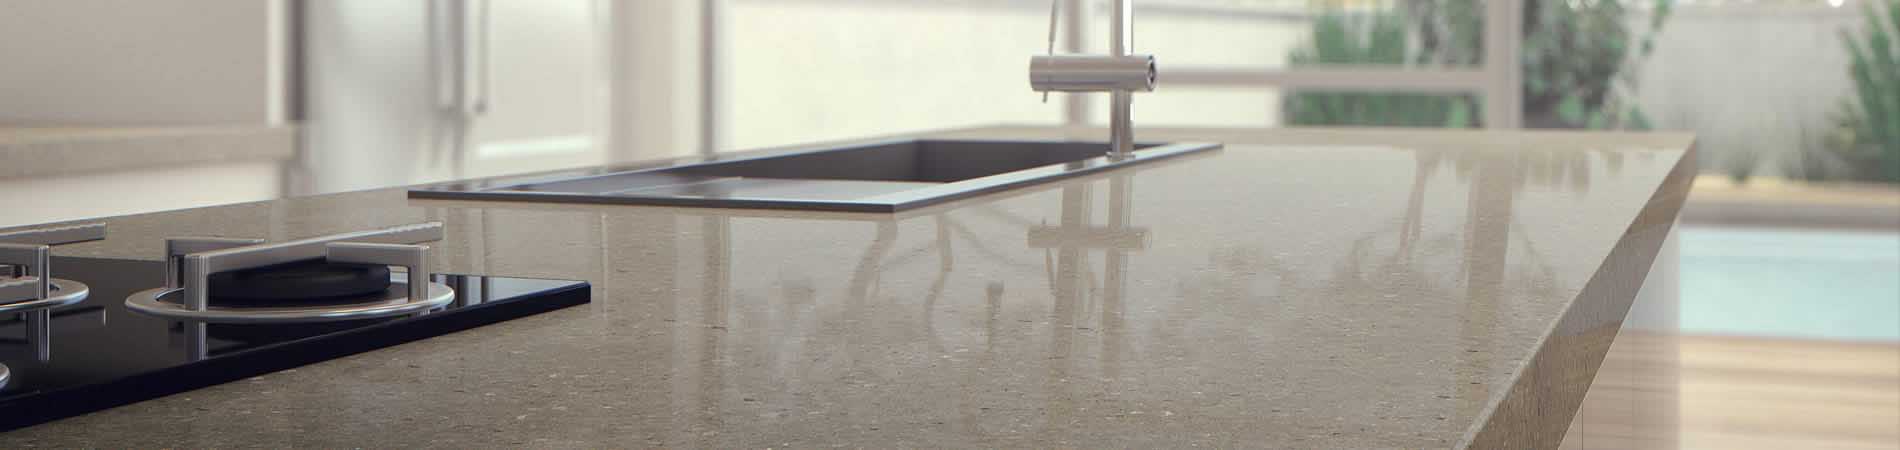 Our kitchen surfaces create fine attractions